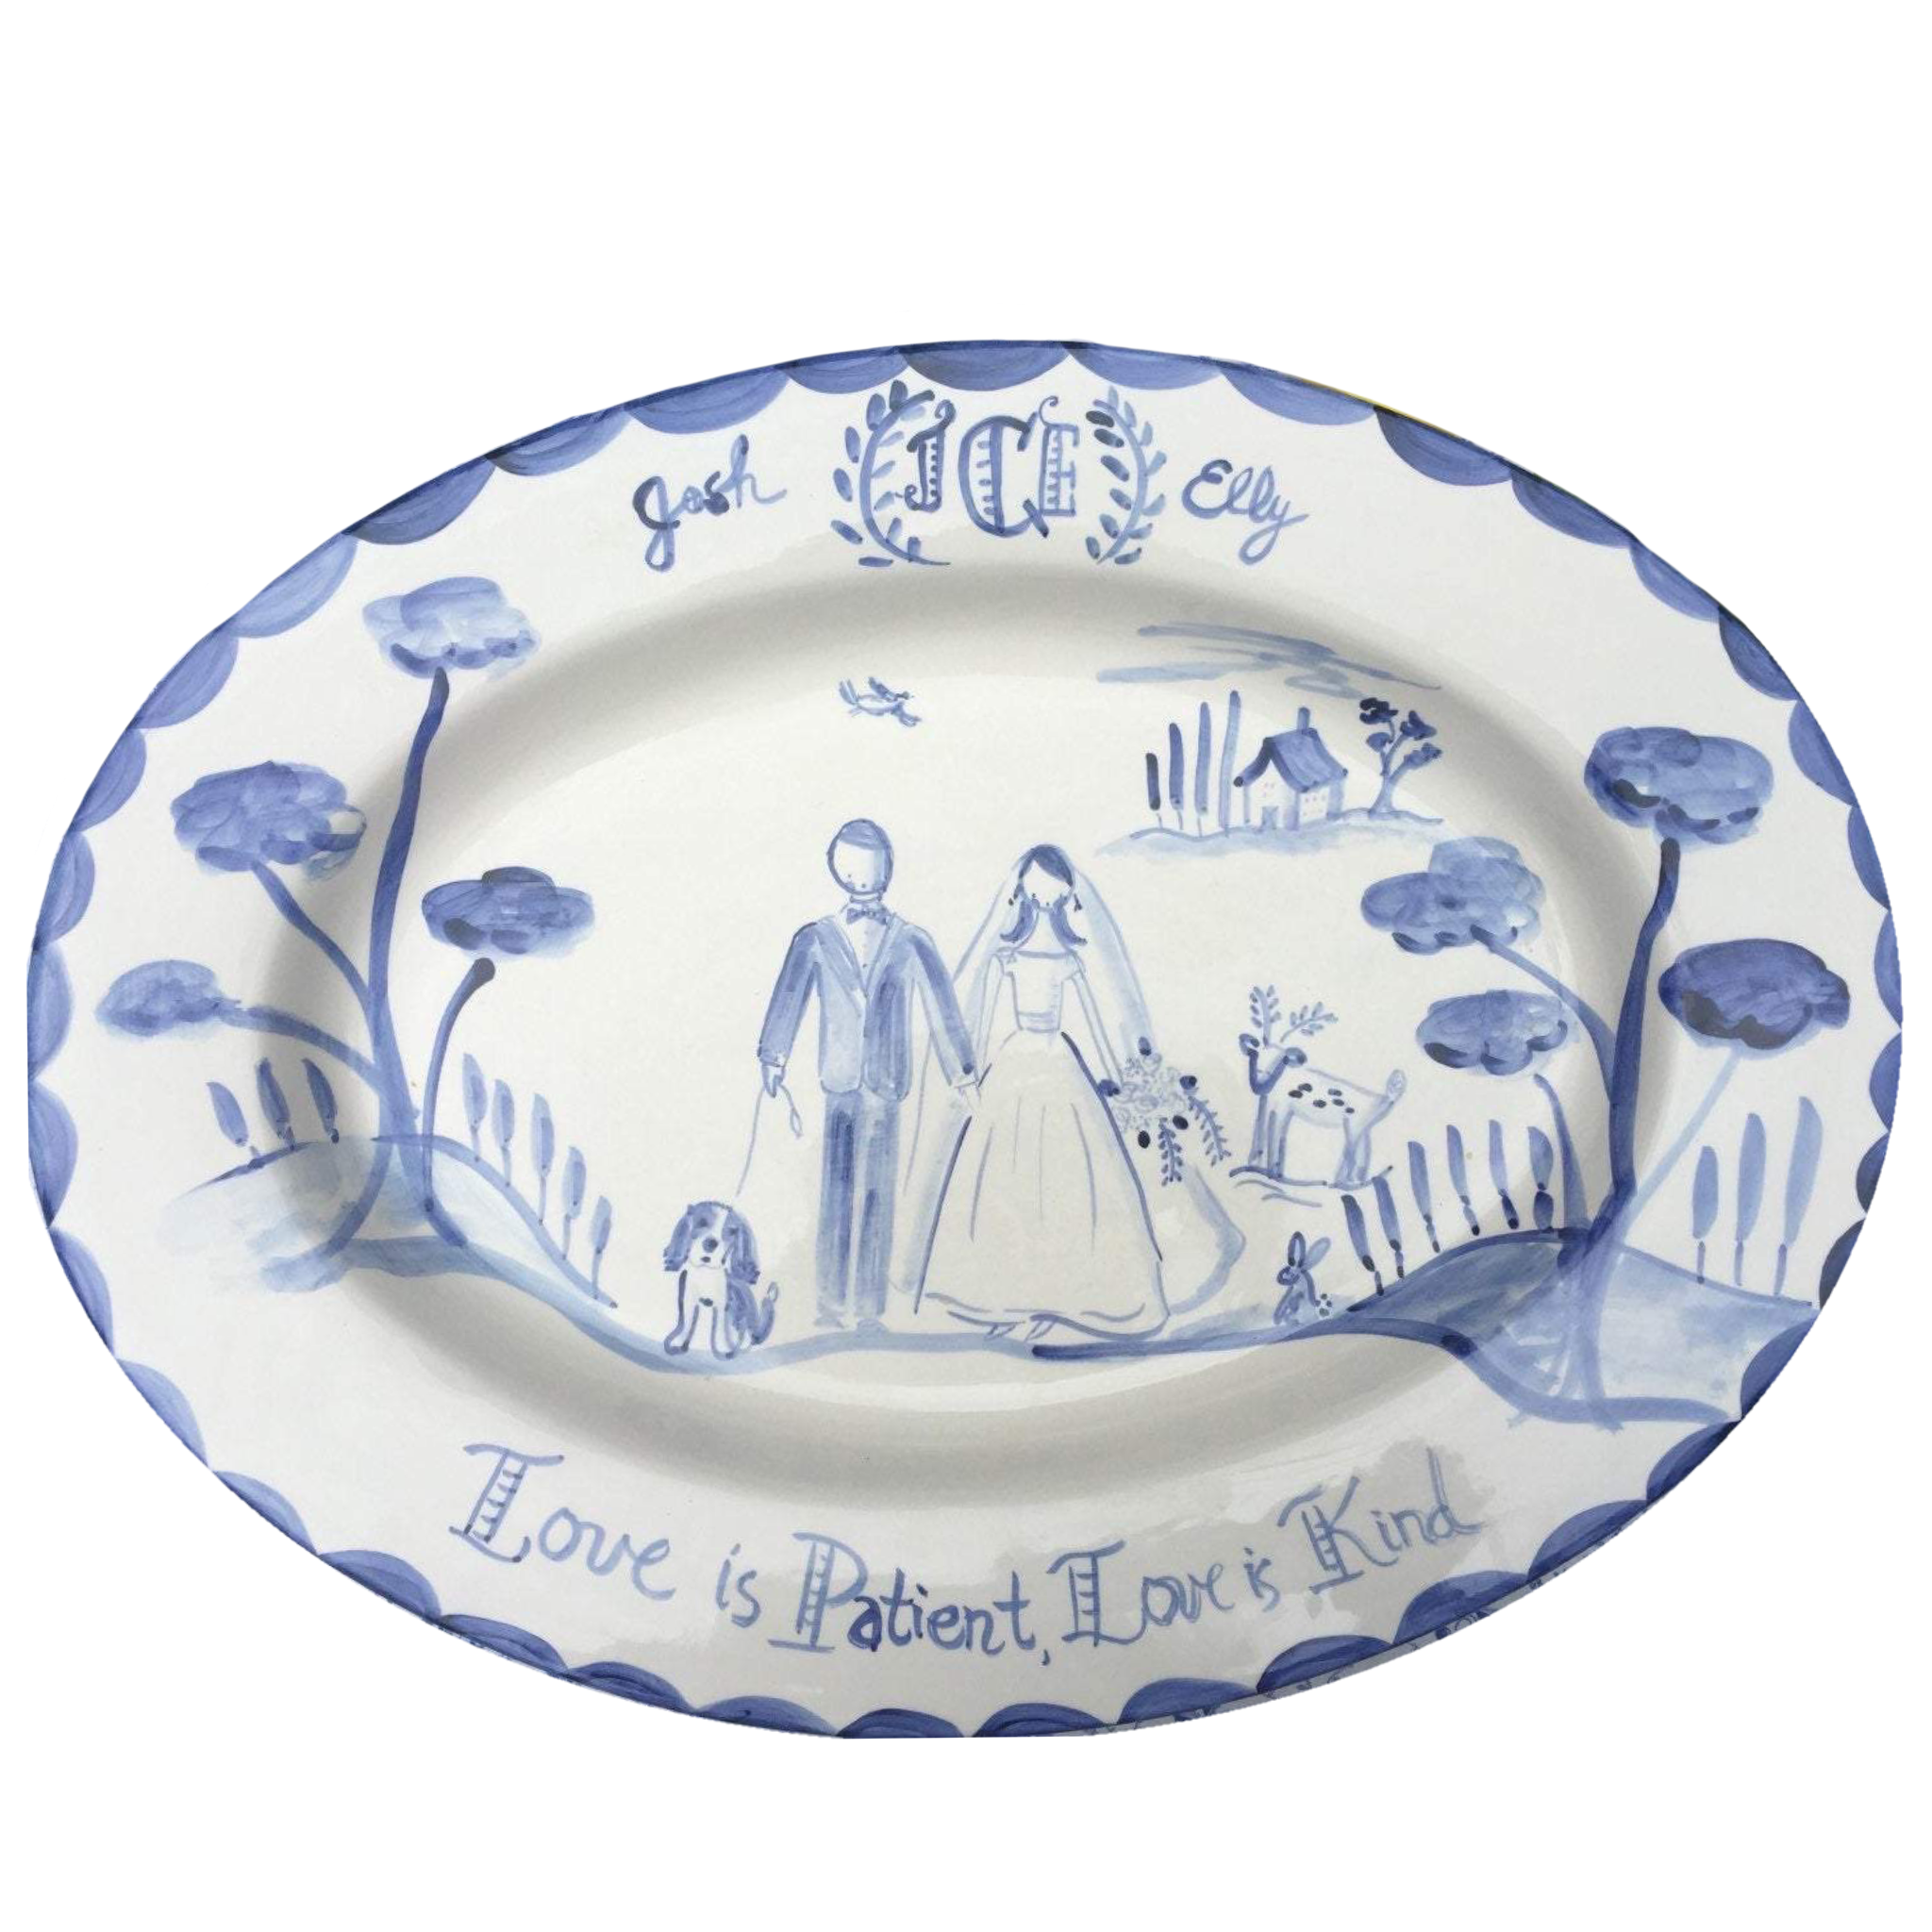 Large Custom Platter - Love is Patient, Love is Kind - Tricia Lowenfield Design